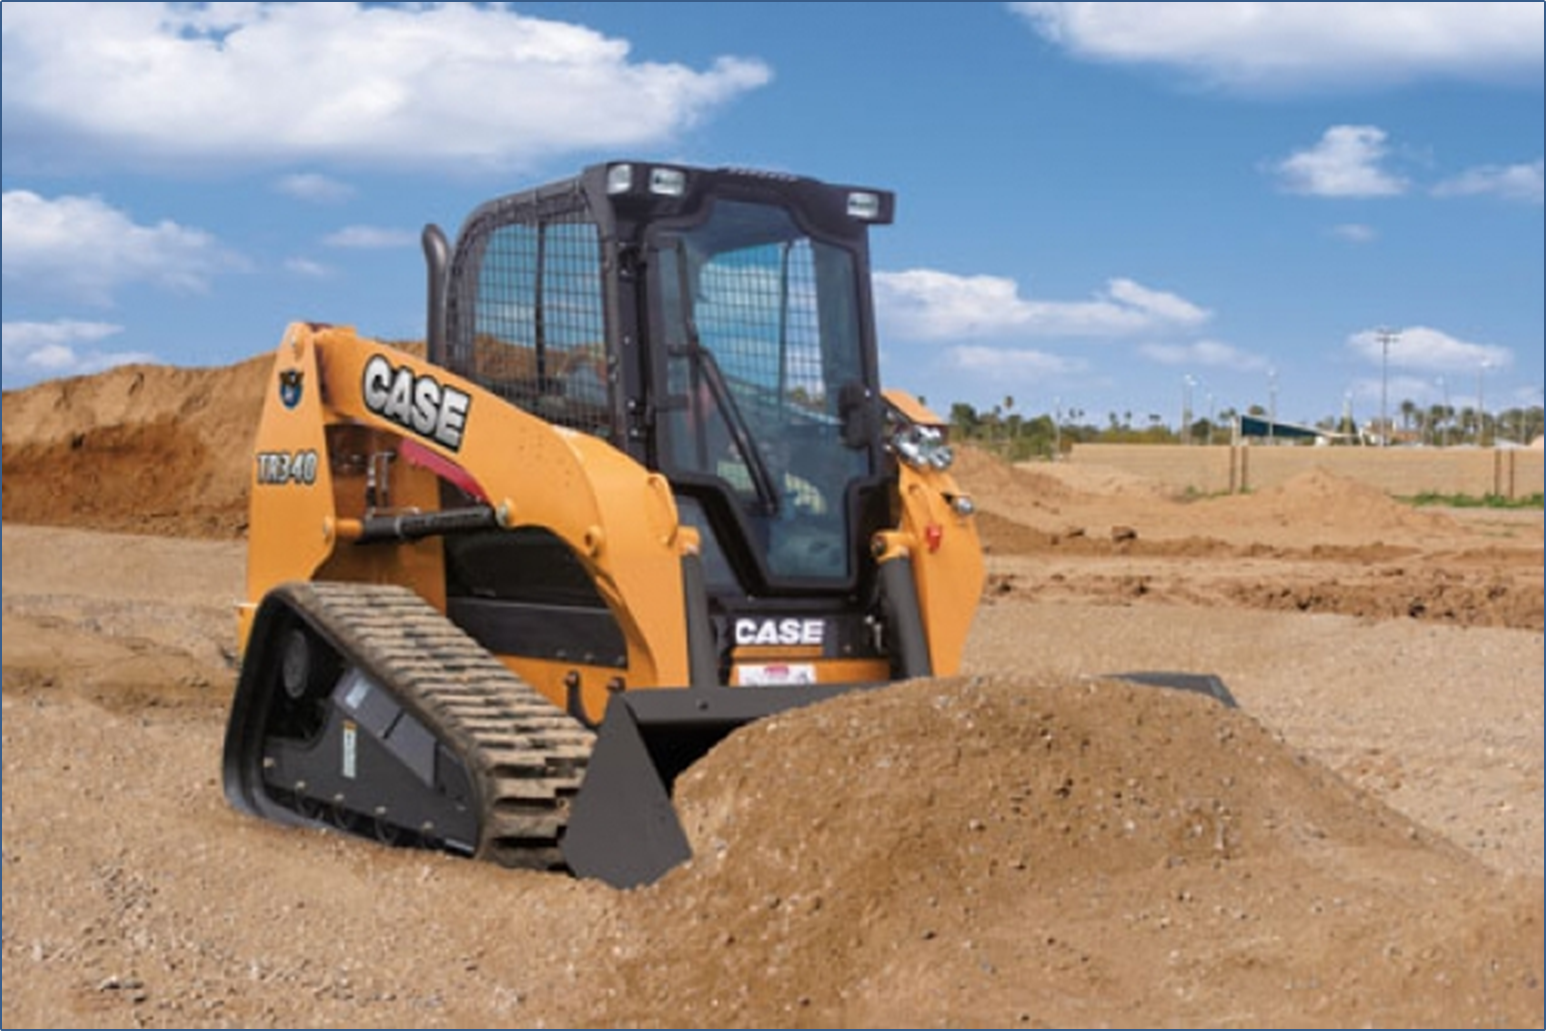 The entirely new TR340 compact track loader